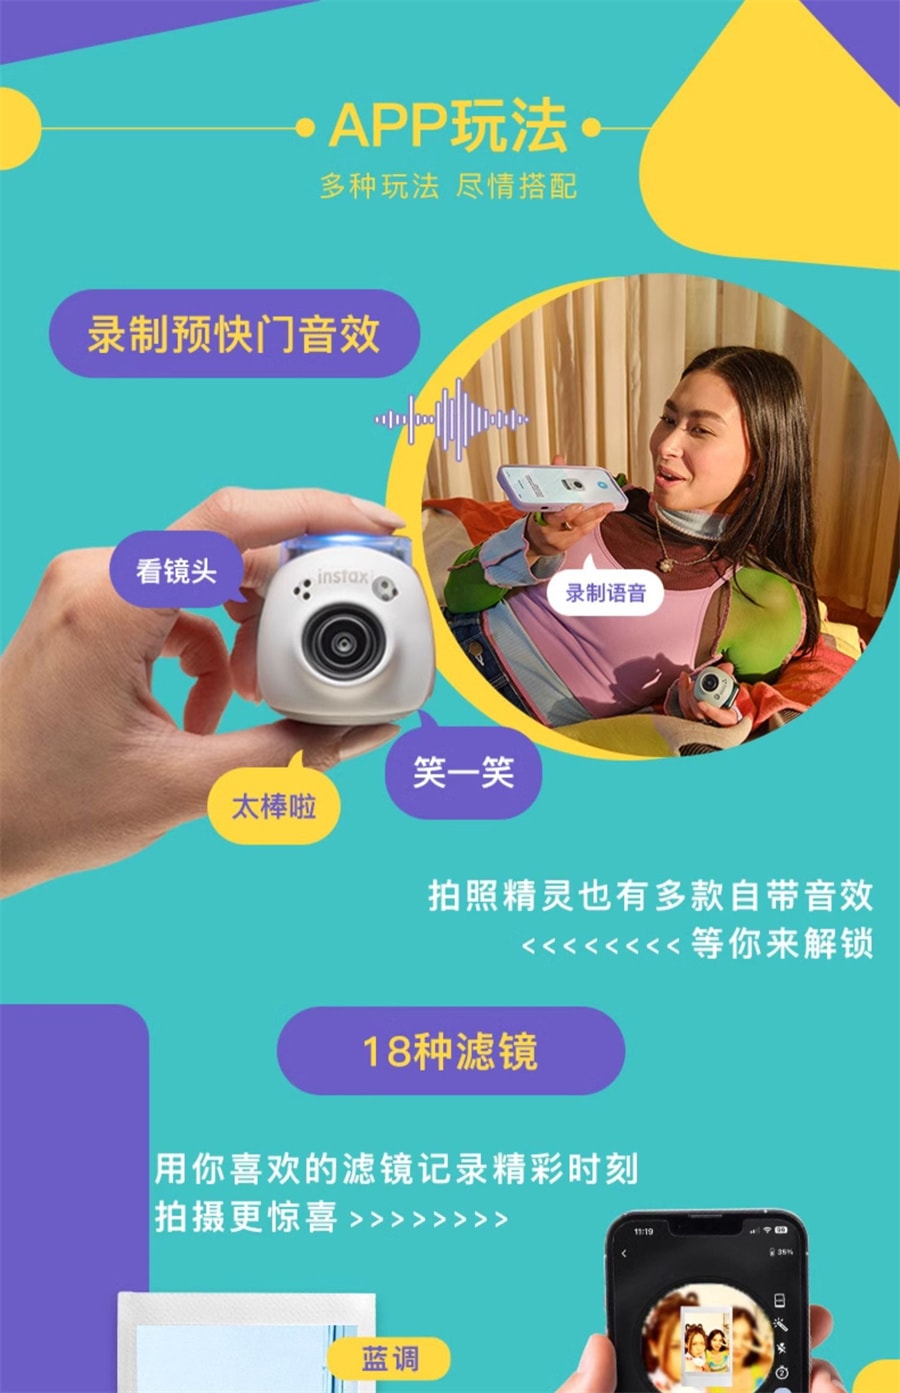 Instax Pal Smart Camera Compact Portable Mini Photo Wizard Pal Cute Snowball White Official Standard